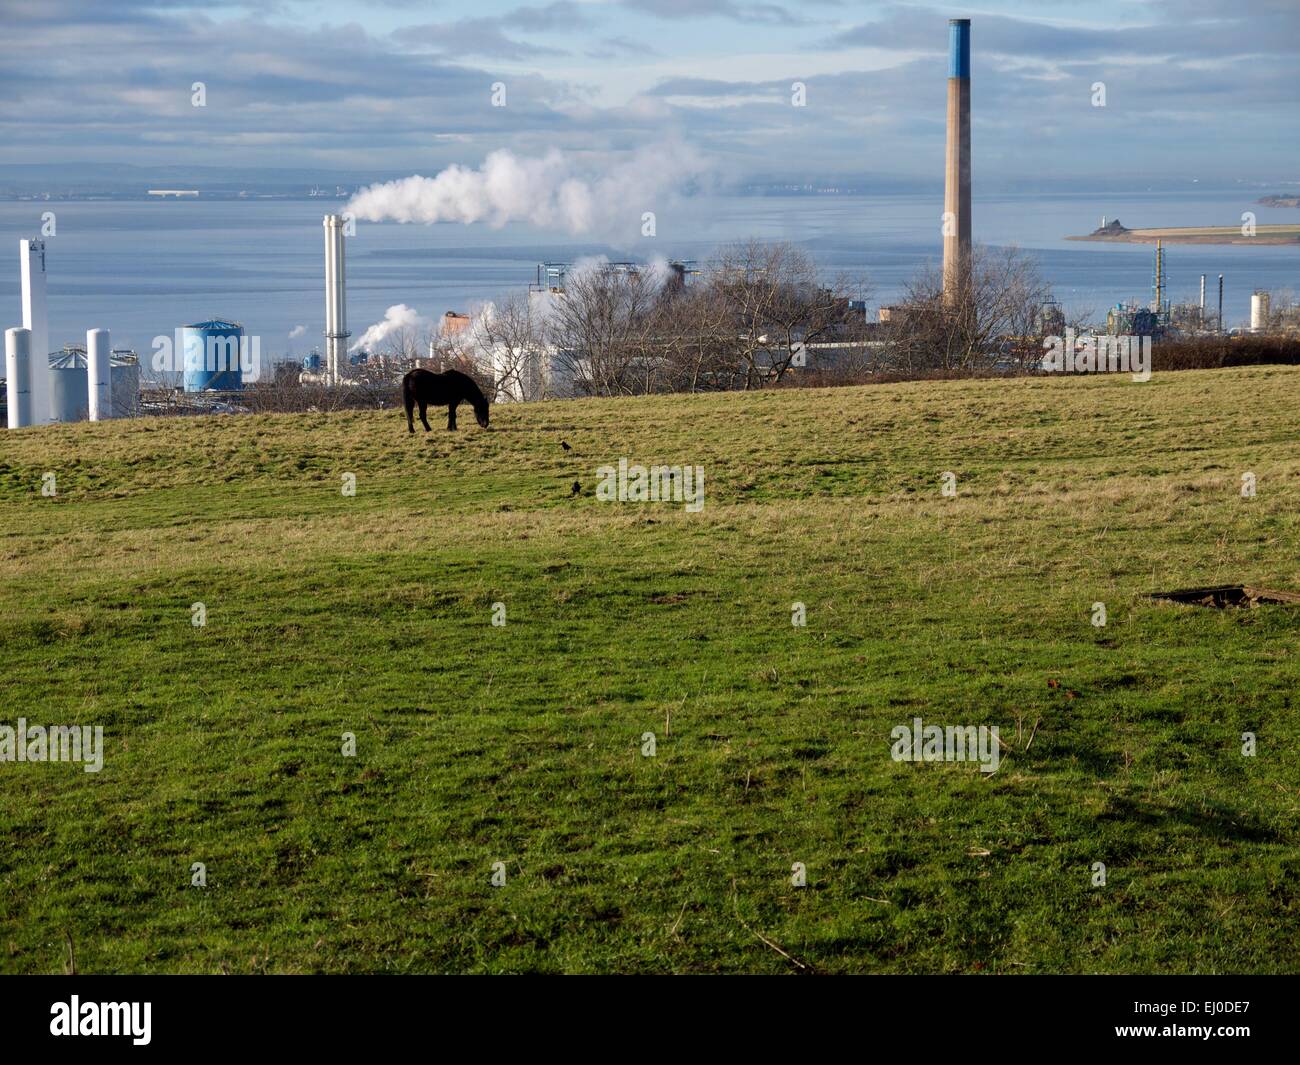 Horse grazing in a field in front of a chemical plant, with a river in the background. Stock Photo